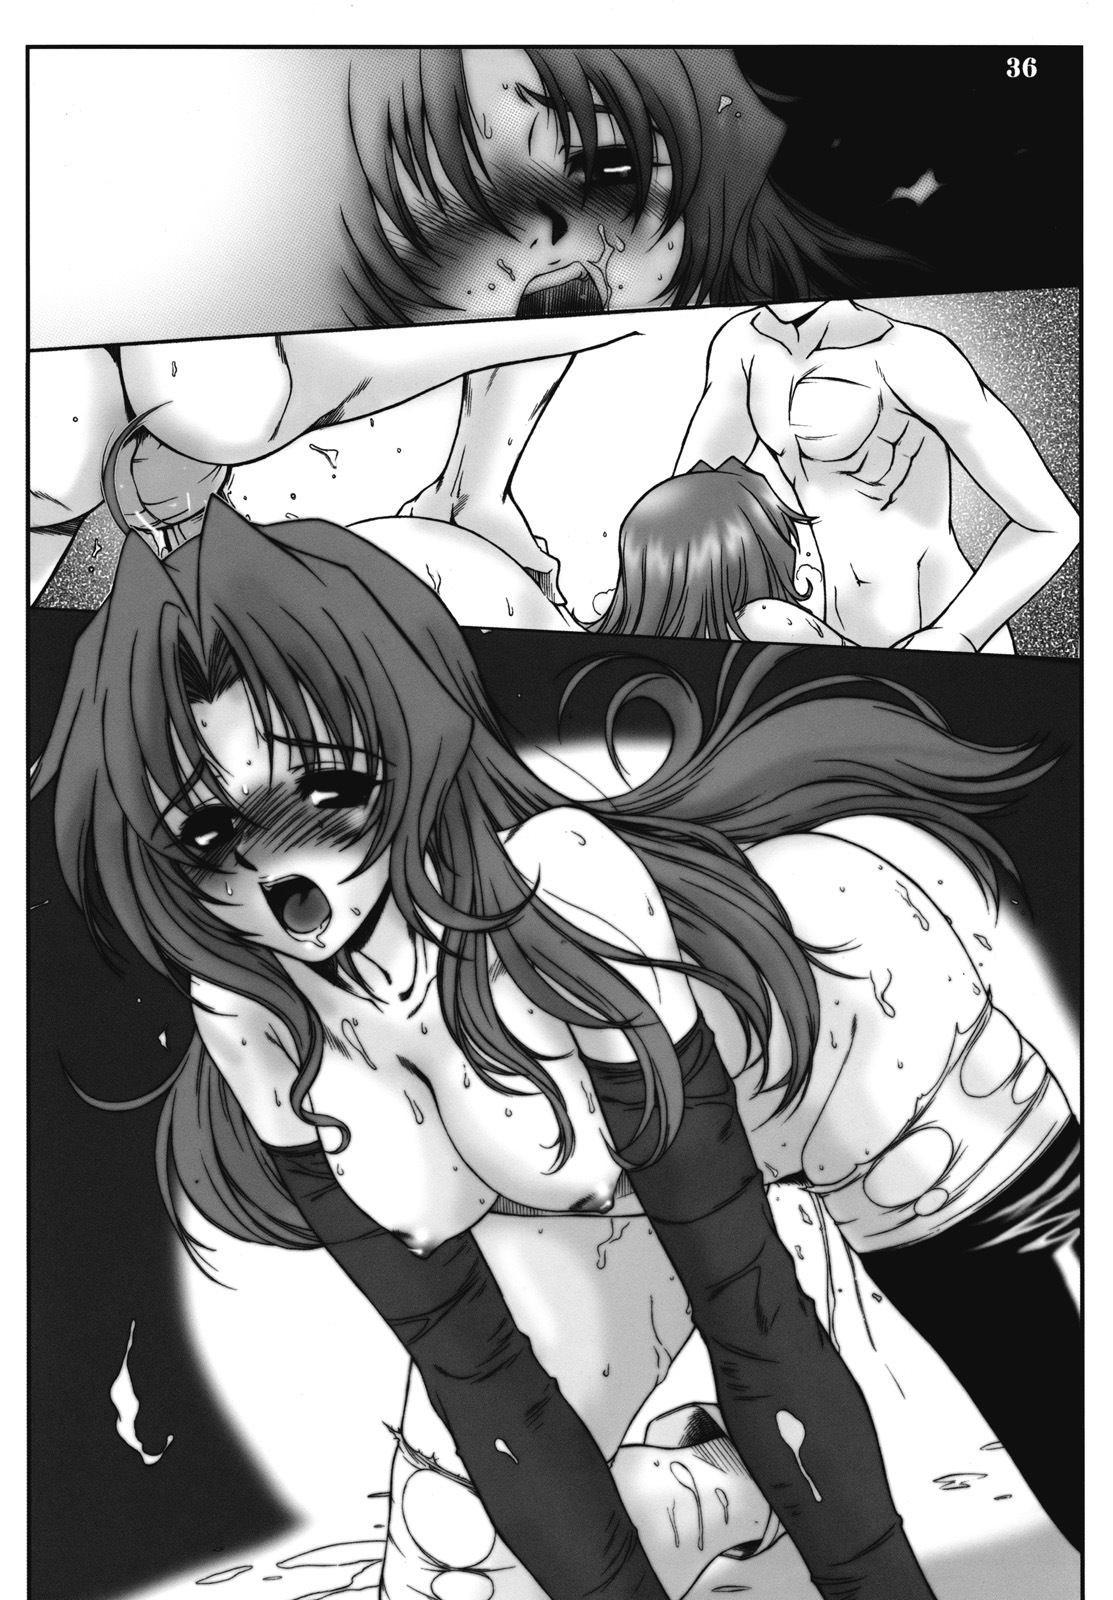 (SC32) [AXZ (Various)] UNDER RED E2 (Kiddy Grade) page 37 full